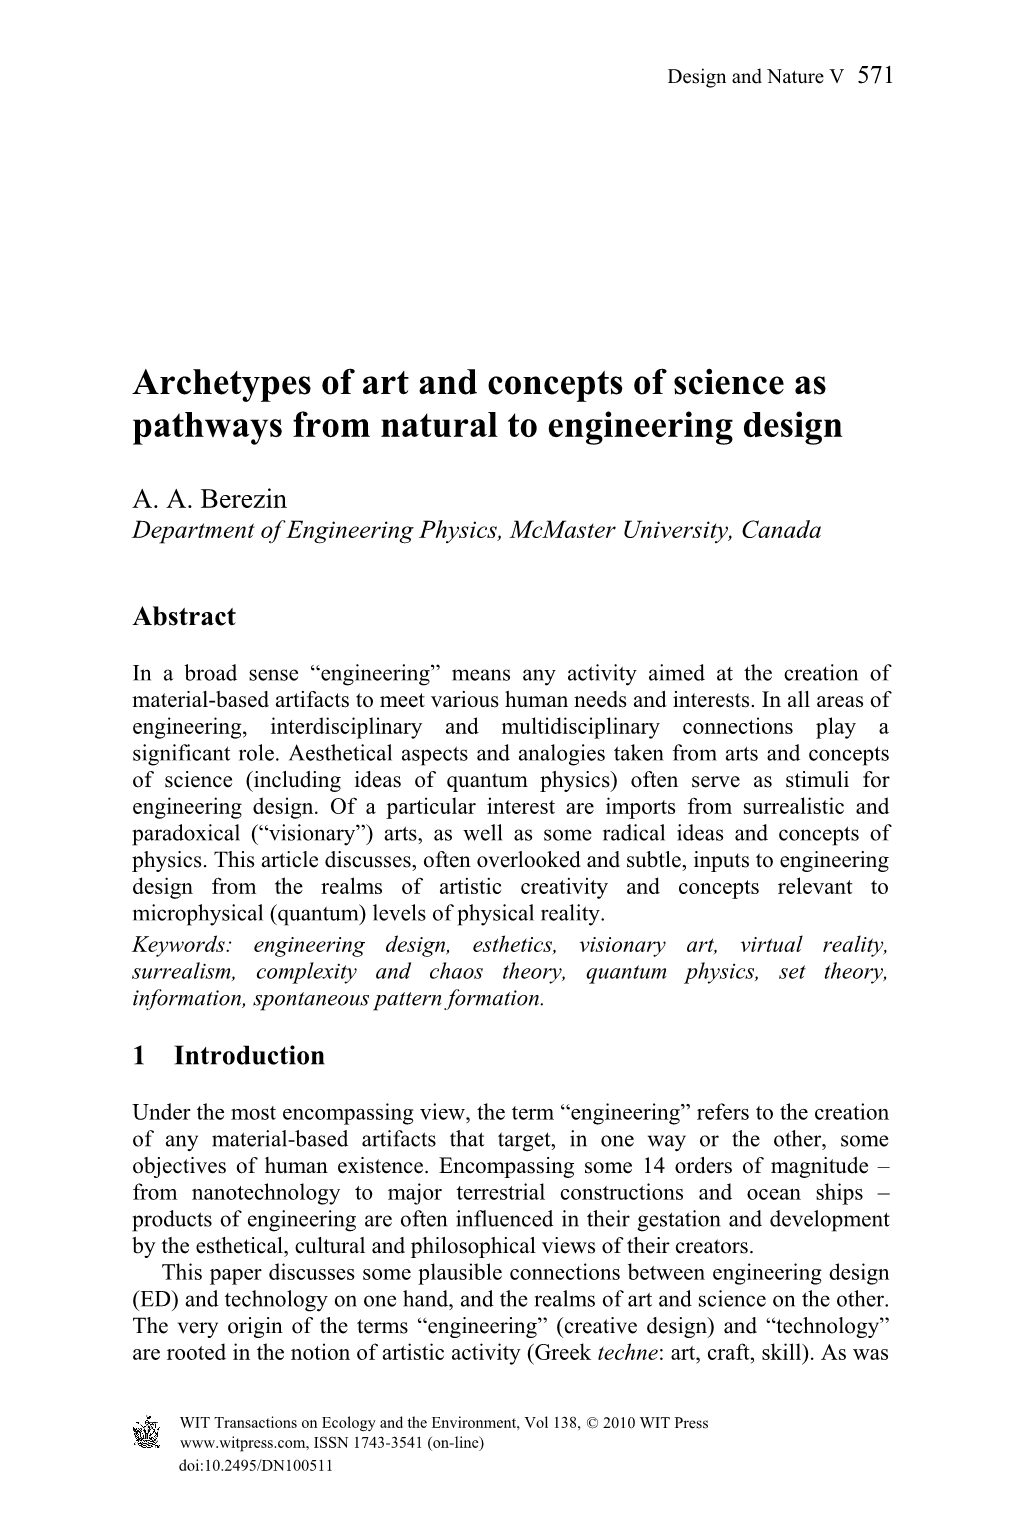 Archetypes of Art and Concepts of Science As Pathways from Natural to Engineering Design